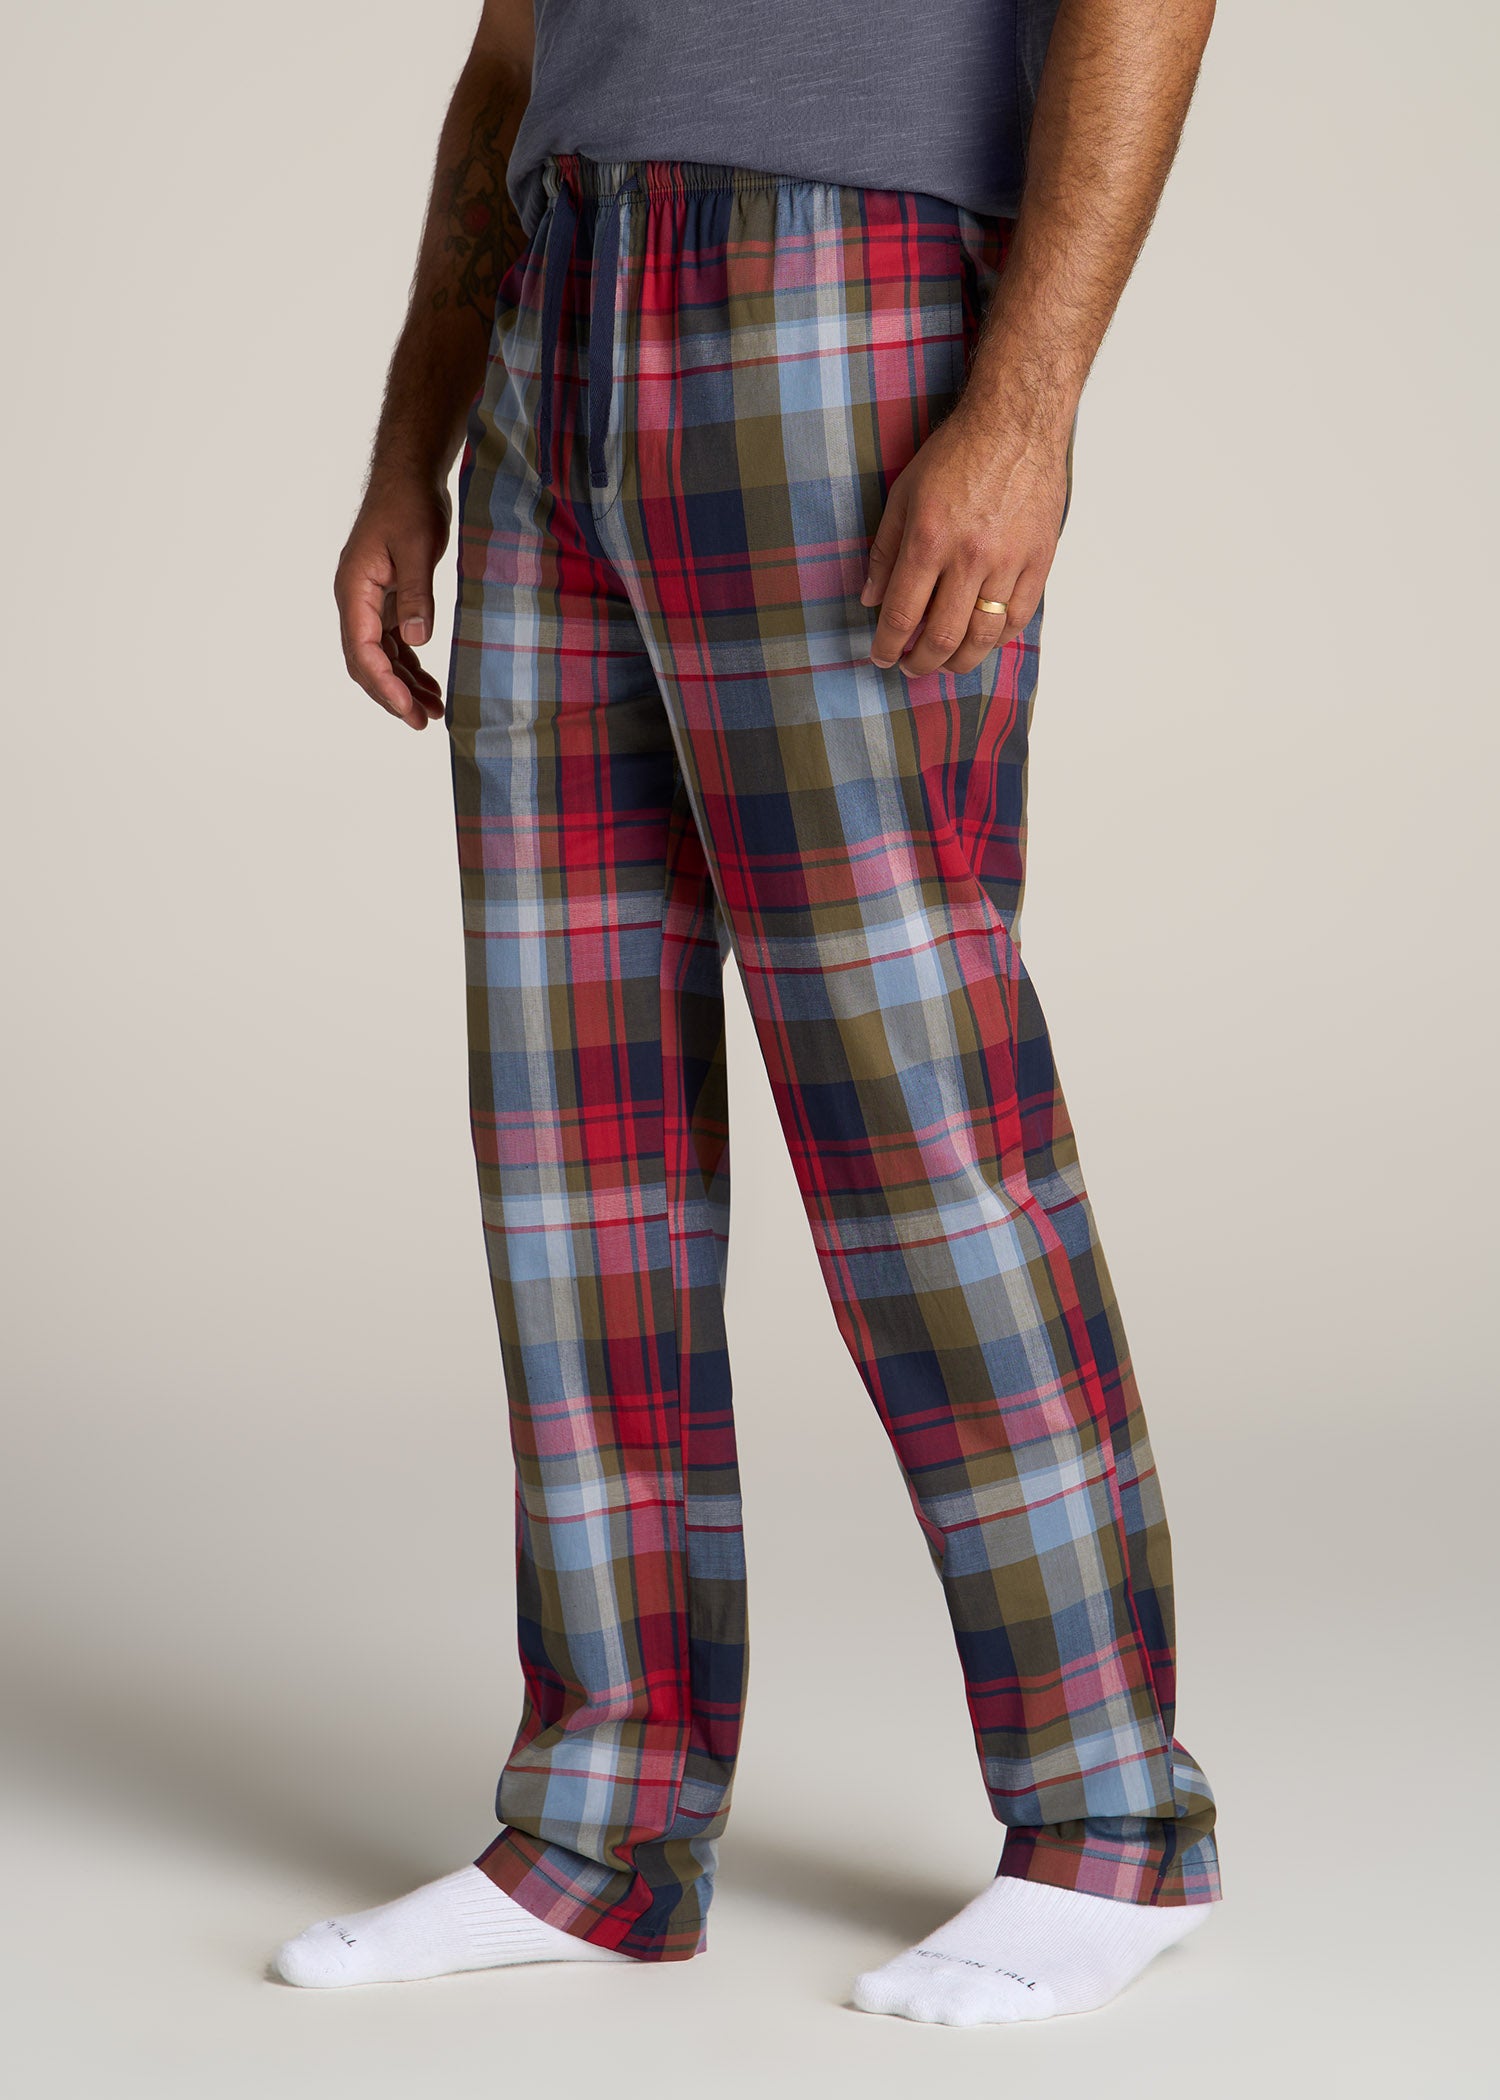 Relaxed Fit Womens Premium 100% Cotton Flannel Lounge Pants